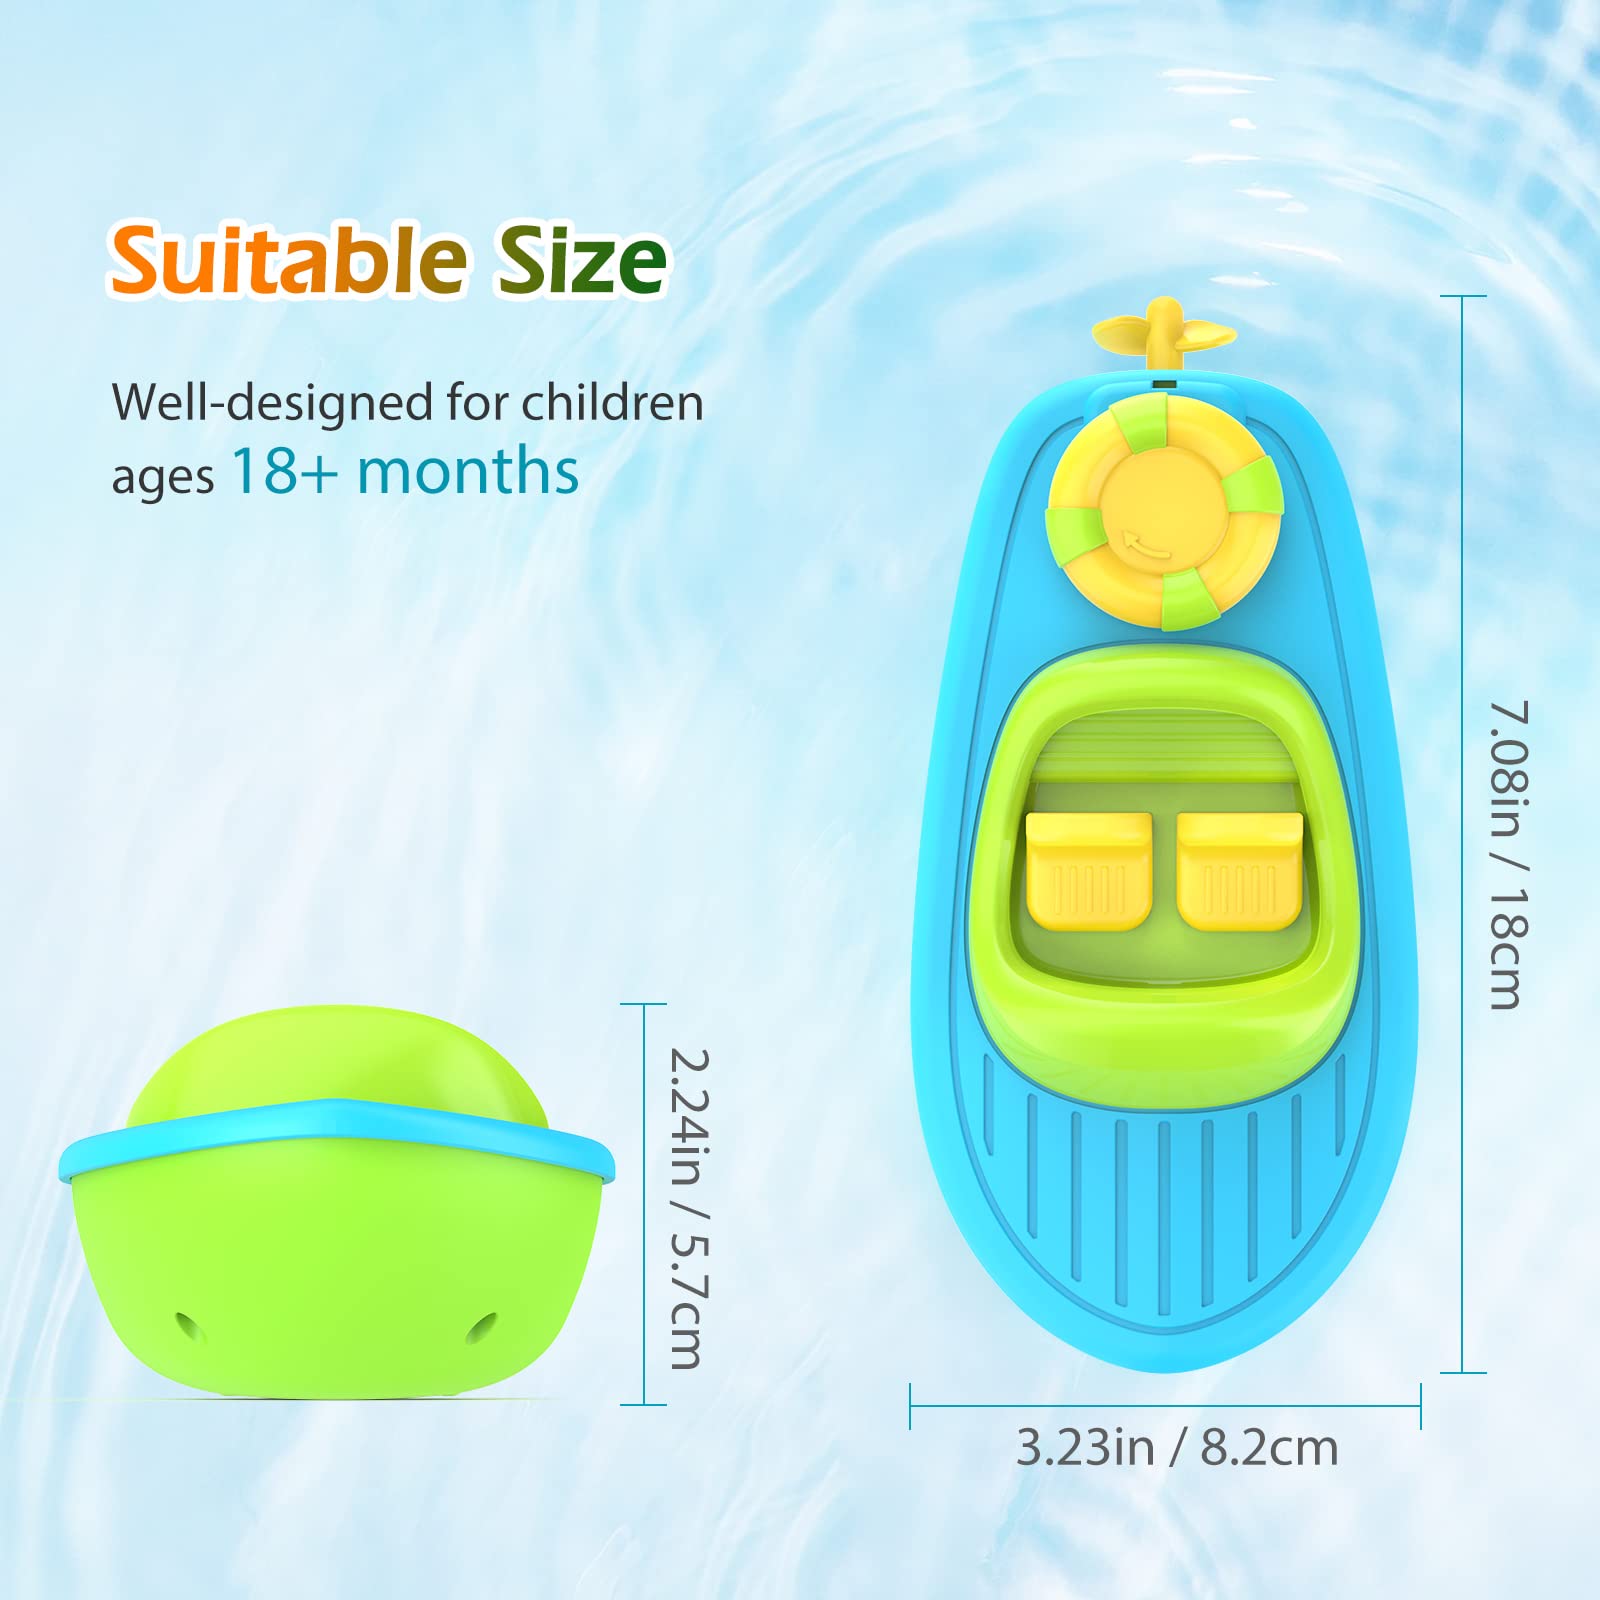 KINDIARY Bath Toy, Floating Wind-up Boat, Water Table Pool Bath Time Bathtub Tub Toy for Toddlers Baby Kids Infant Girls Boys